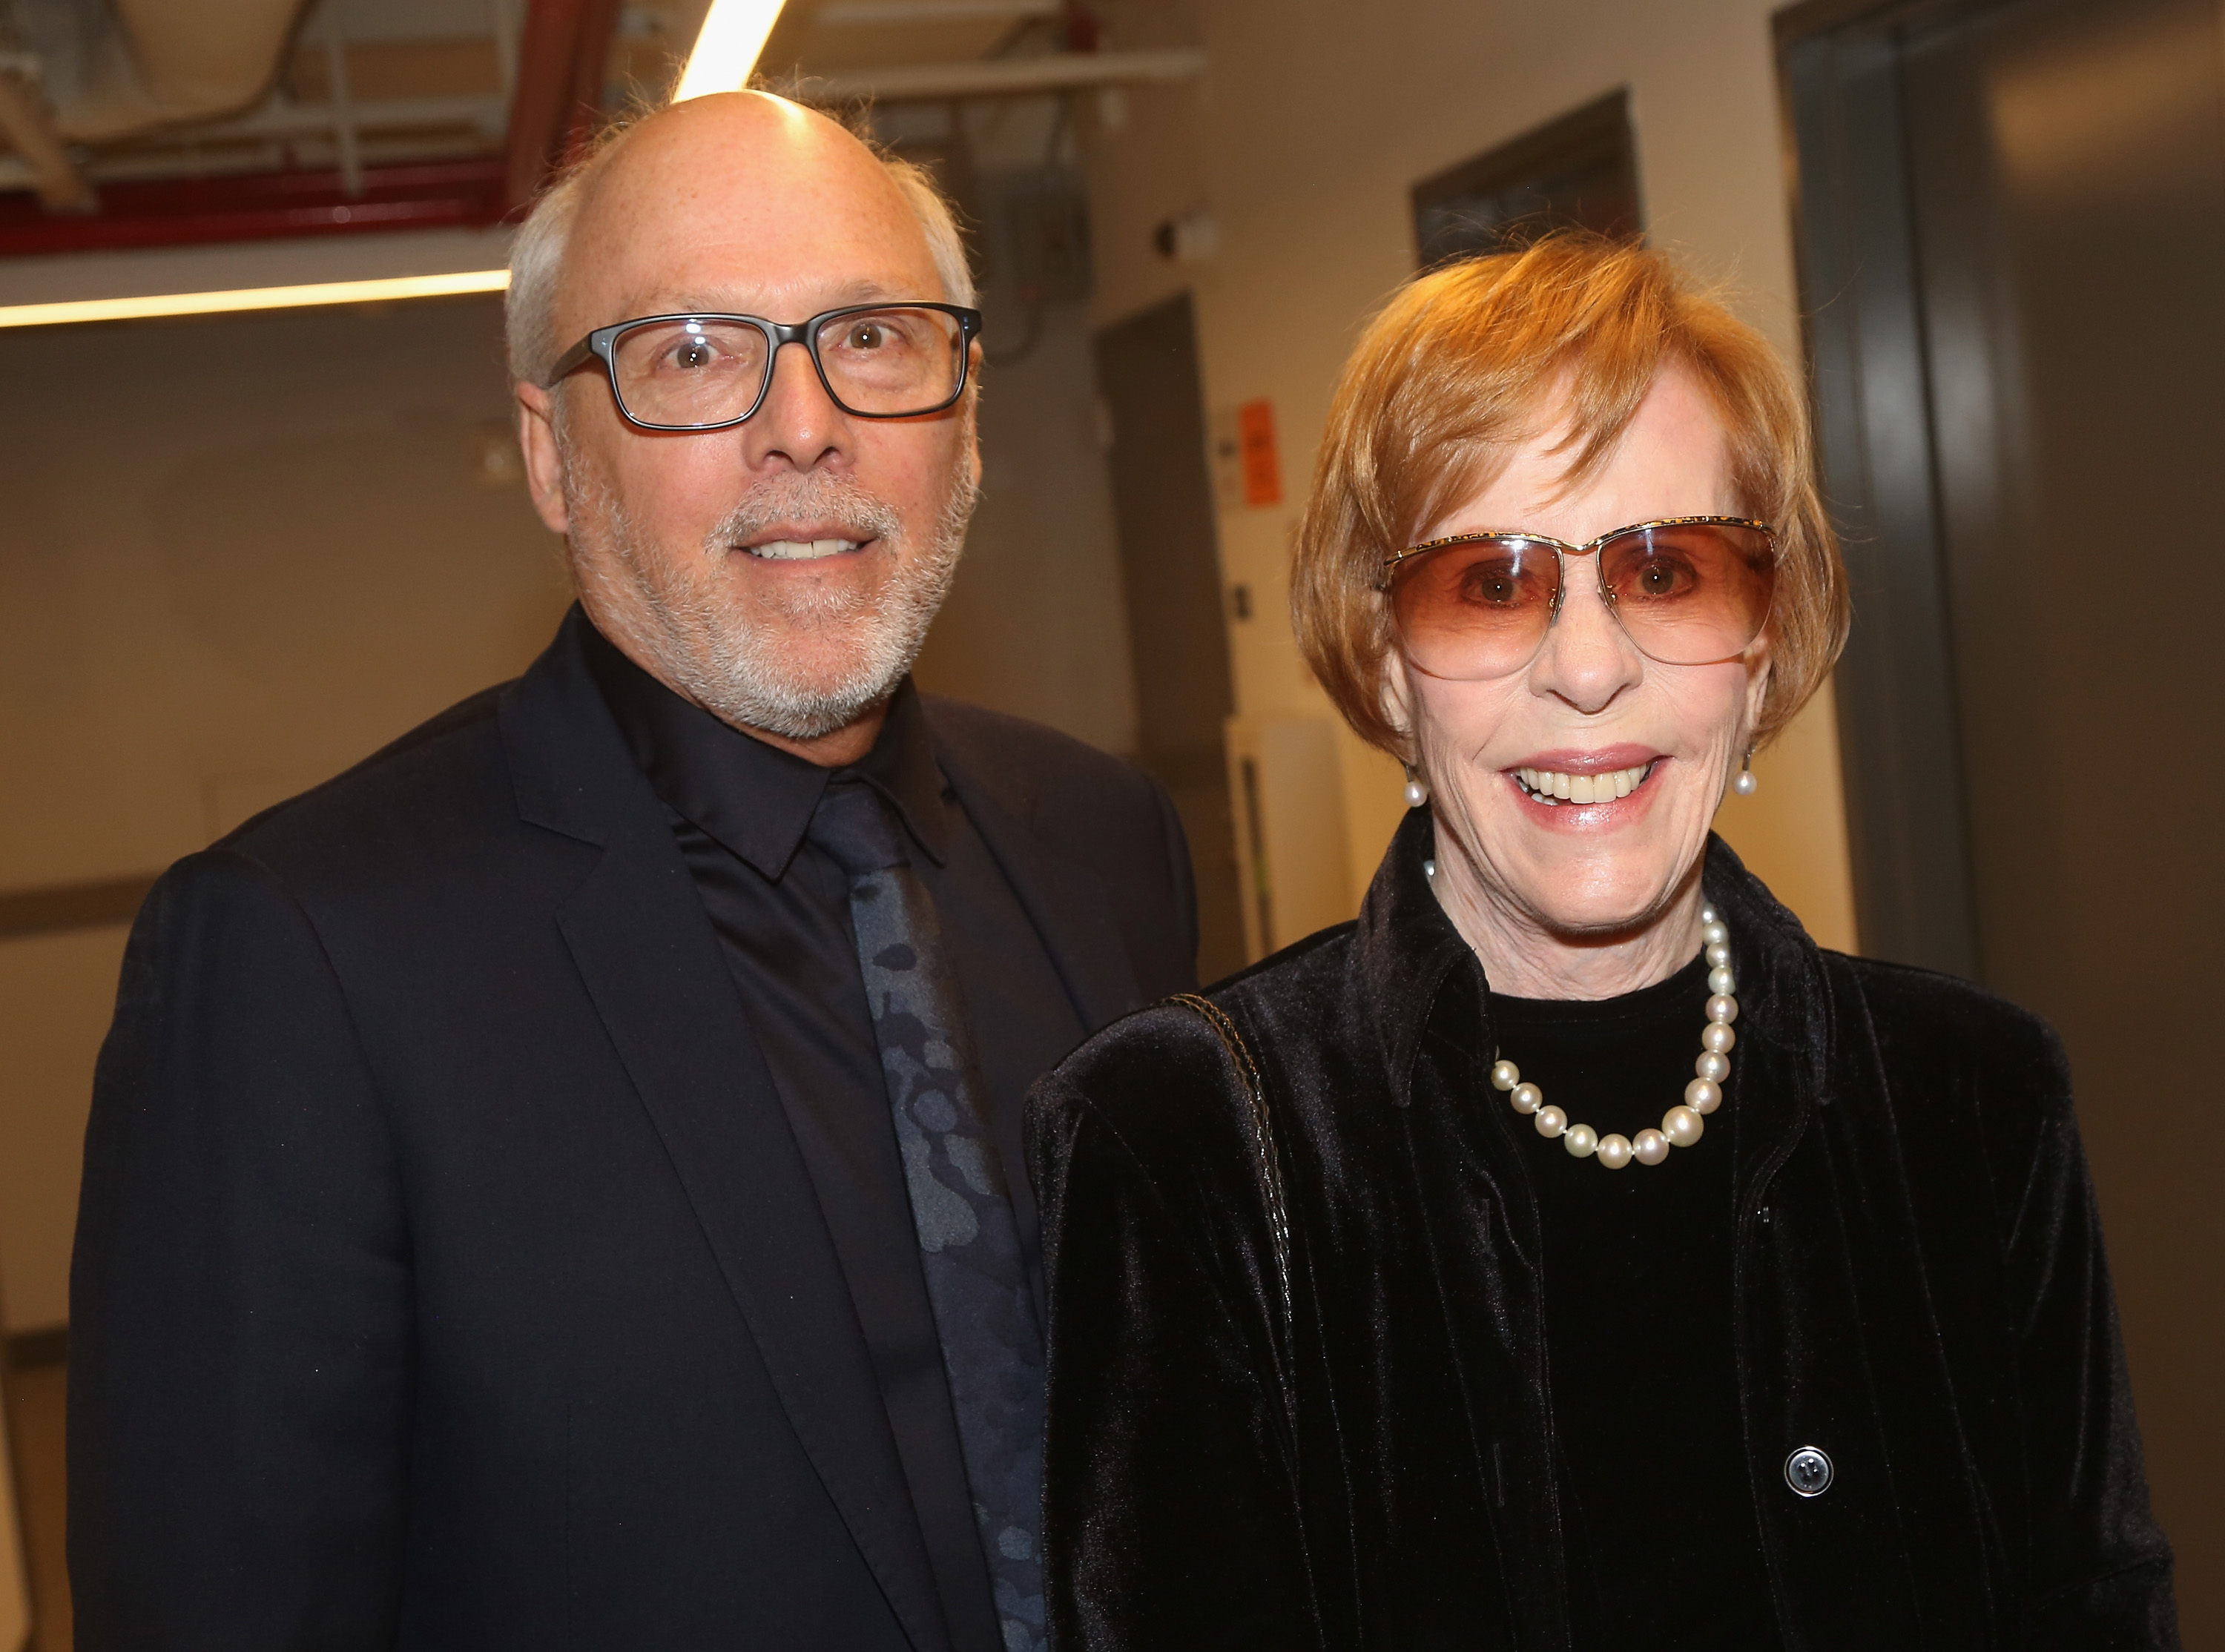 Brian Miller and Carol Burnett pose at the opening night of "Tootsie" on Broadway at The Marquis Theatre on April 23, 2019 in New York City | Source: Getty Images